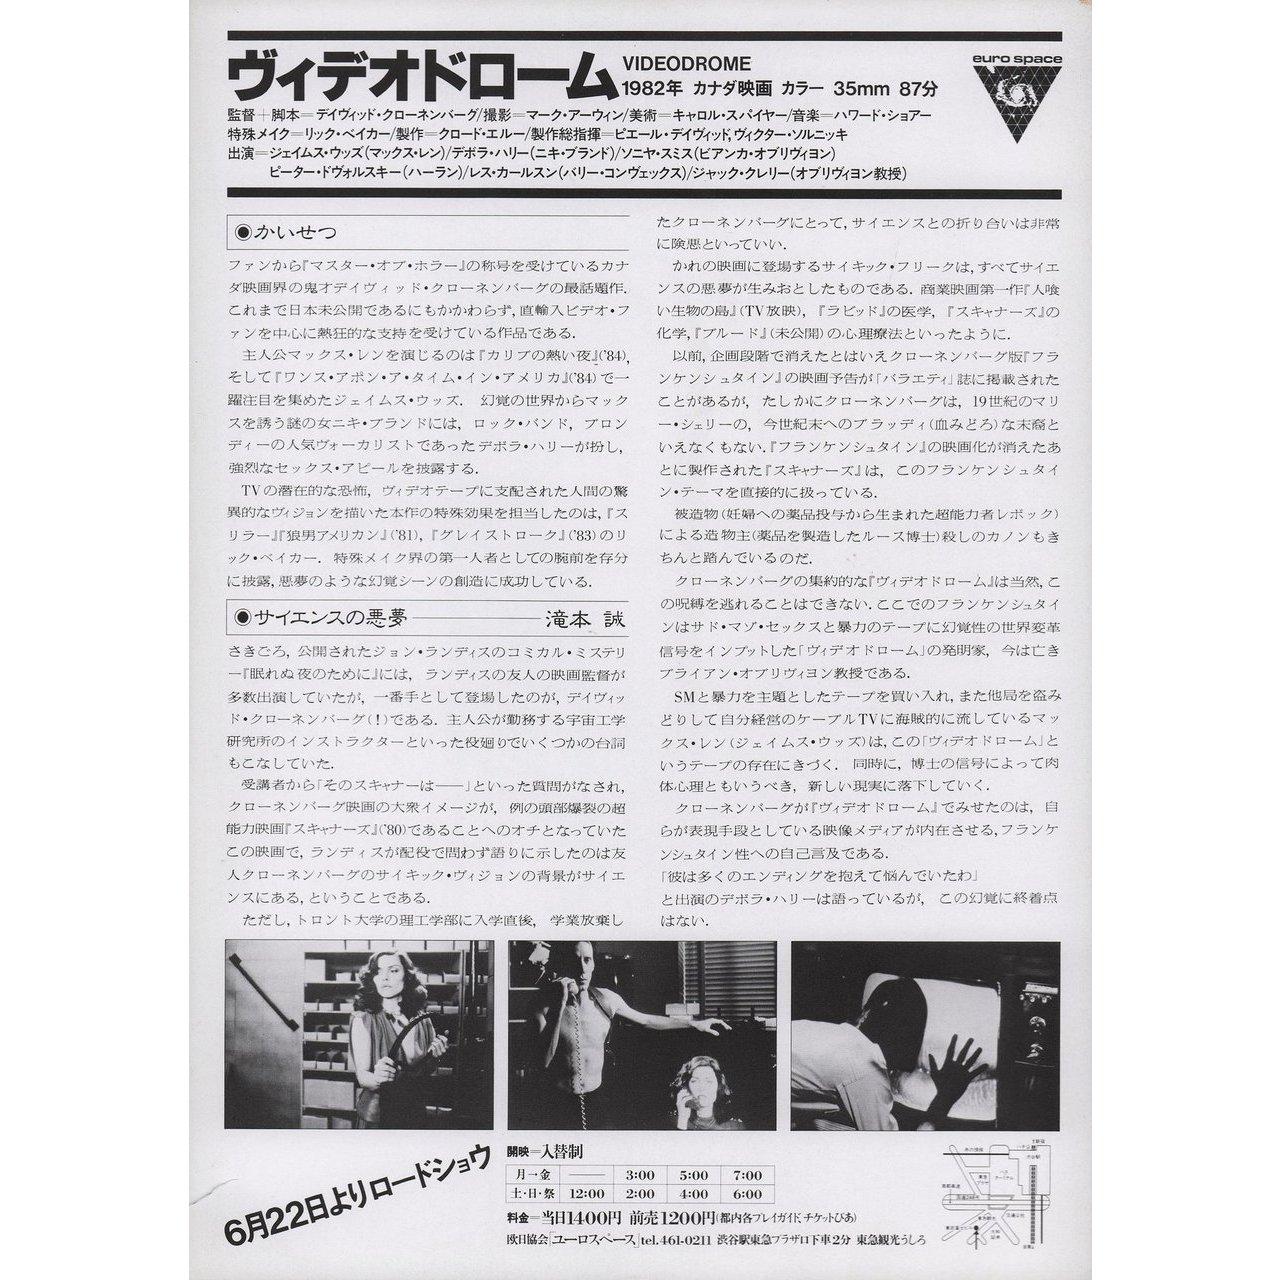 Original 1985 Japanese B5 chirashi flyer for the film Videodrome directed by David Cronenberg with James Woods / Sonja Smits / Deborah Harry / Peter Dvorsky. Very good-fine condition, rolled with 1 inch tear at bottom. Please note: the size is